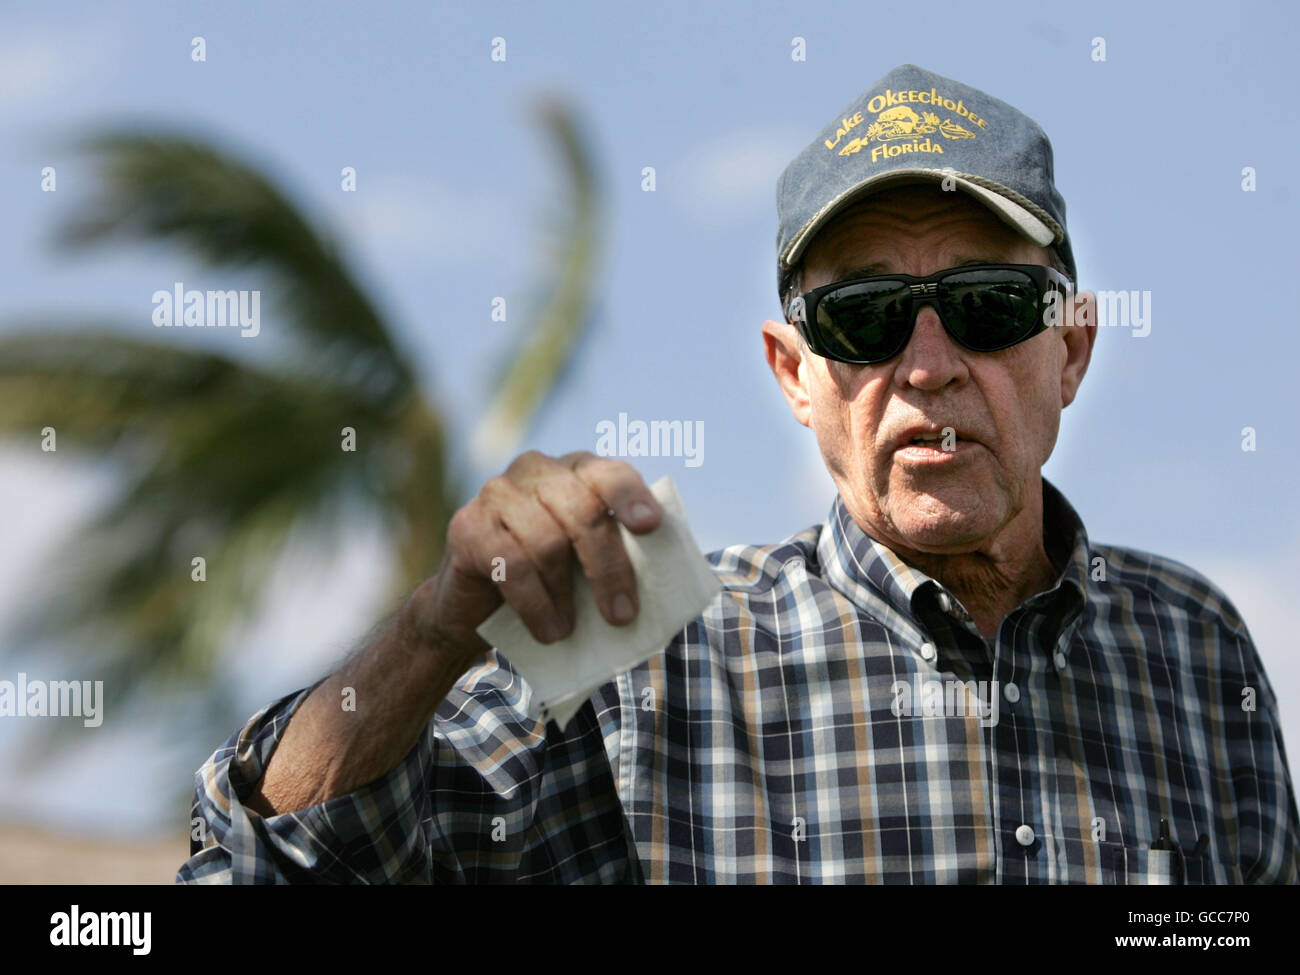 Florida, USA. 8th July, 2016. Wayne Nelson of Okeechobee talks about Lake Okeechobee and the damage done to the Herbert Hoover dike by hurricane Wilma. Portions of Herbert Hoover dike south of Pahokee were washed away by wave action during hurricane Wilma on October 30, 2005. © Allen Eyestone/The Palm Beach Post/ZUMA Wire/Alamy Live News Stock Photo